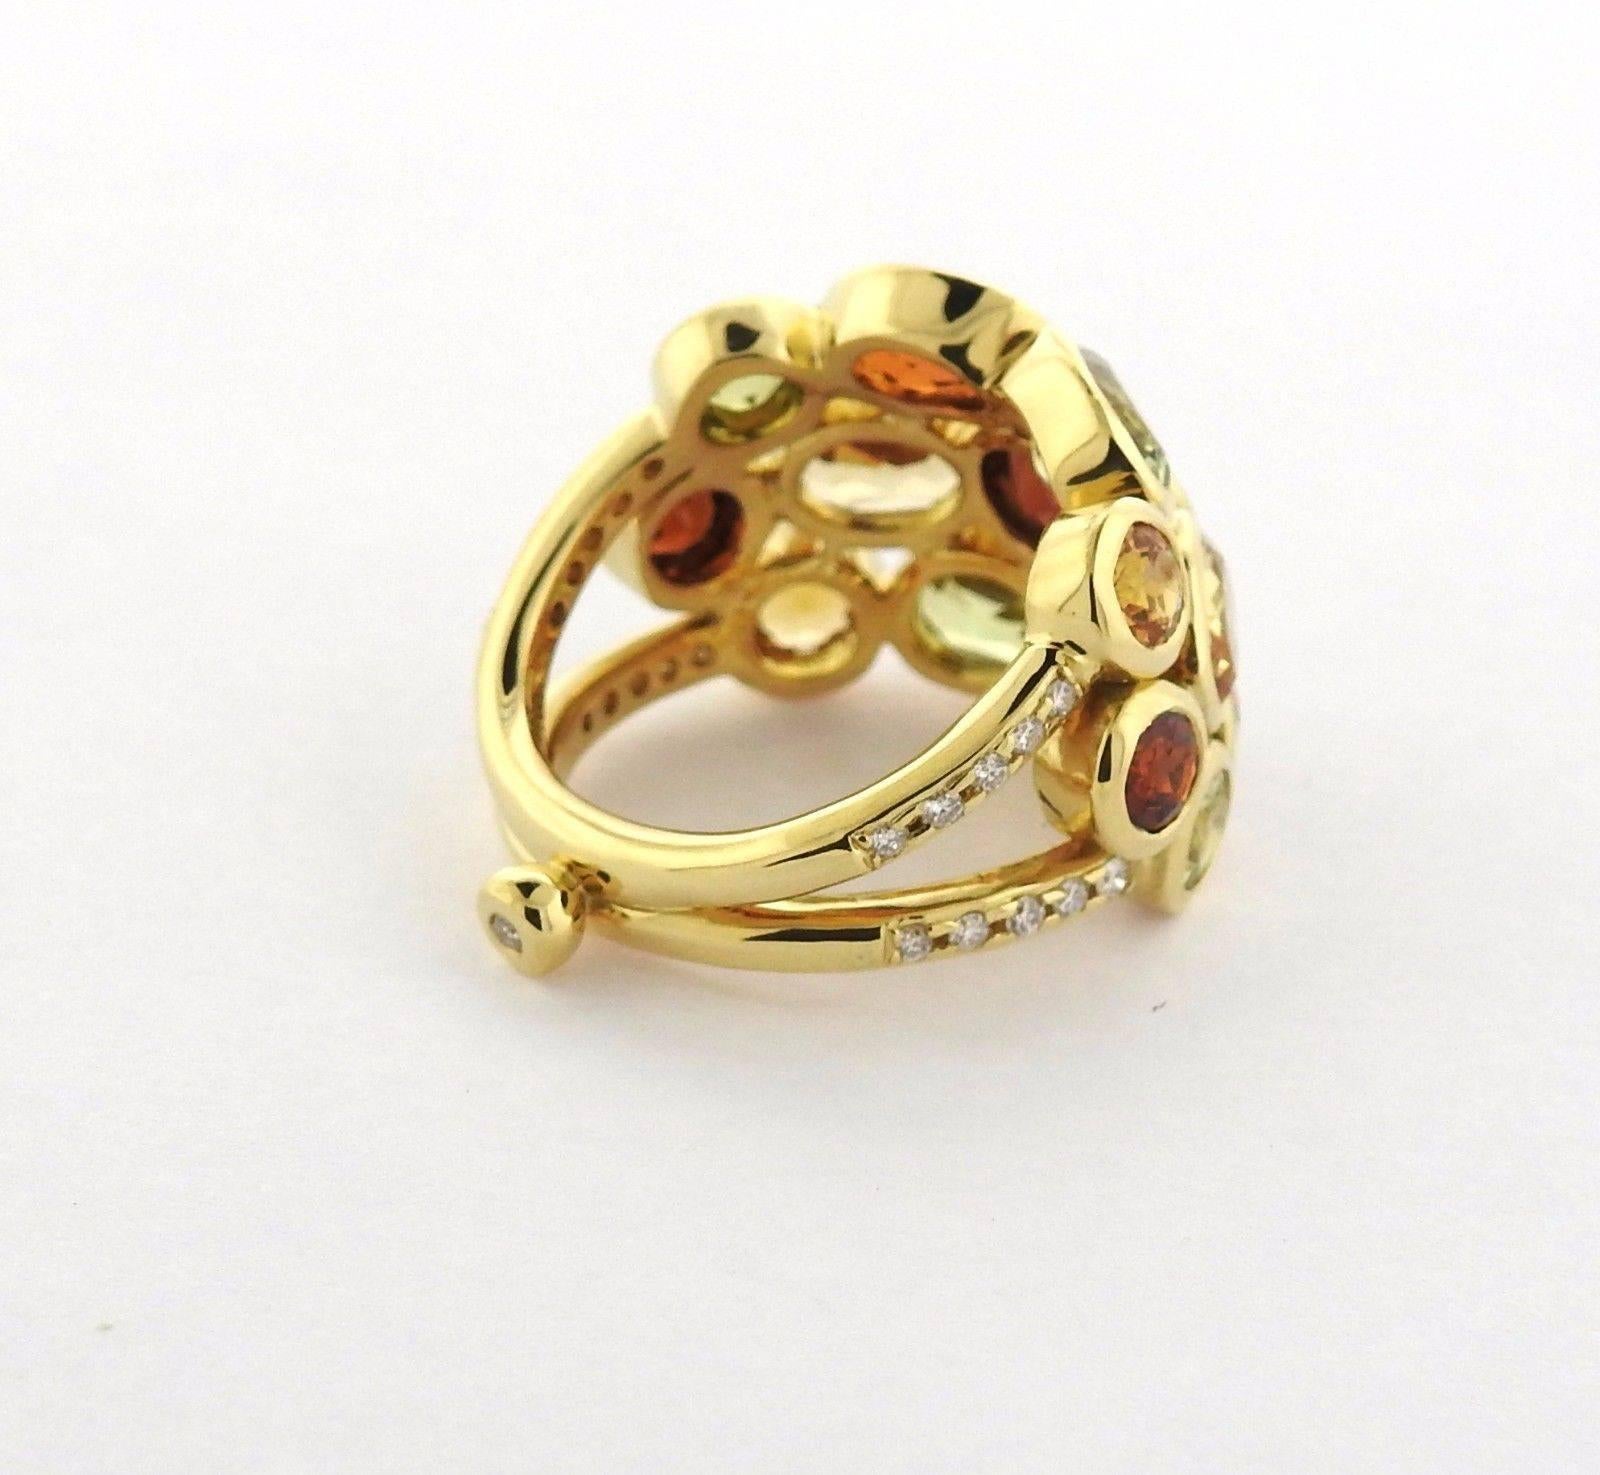 An 18k yellow gold ring set with rose cut mixed garnet and approximately 0.22ctw of G/VS diamonds.  The ring is a size 6.5, ring top is 17.6mm at the widest point.  The weight of the ring is 16.9 grams. Marked: Temple mark, 750.  The retail price of